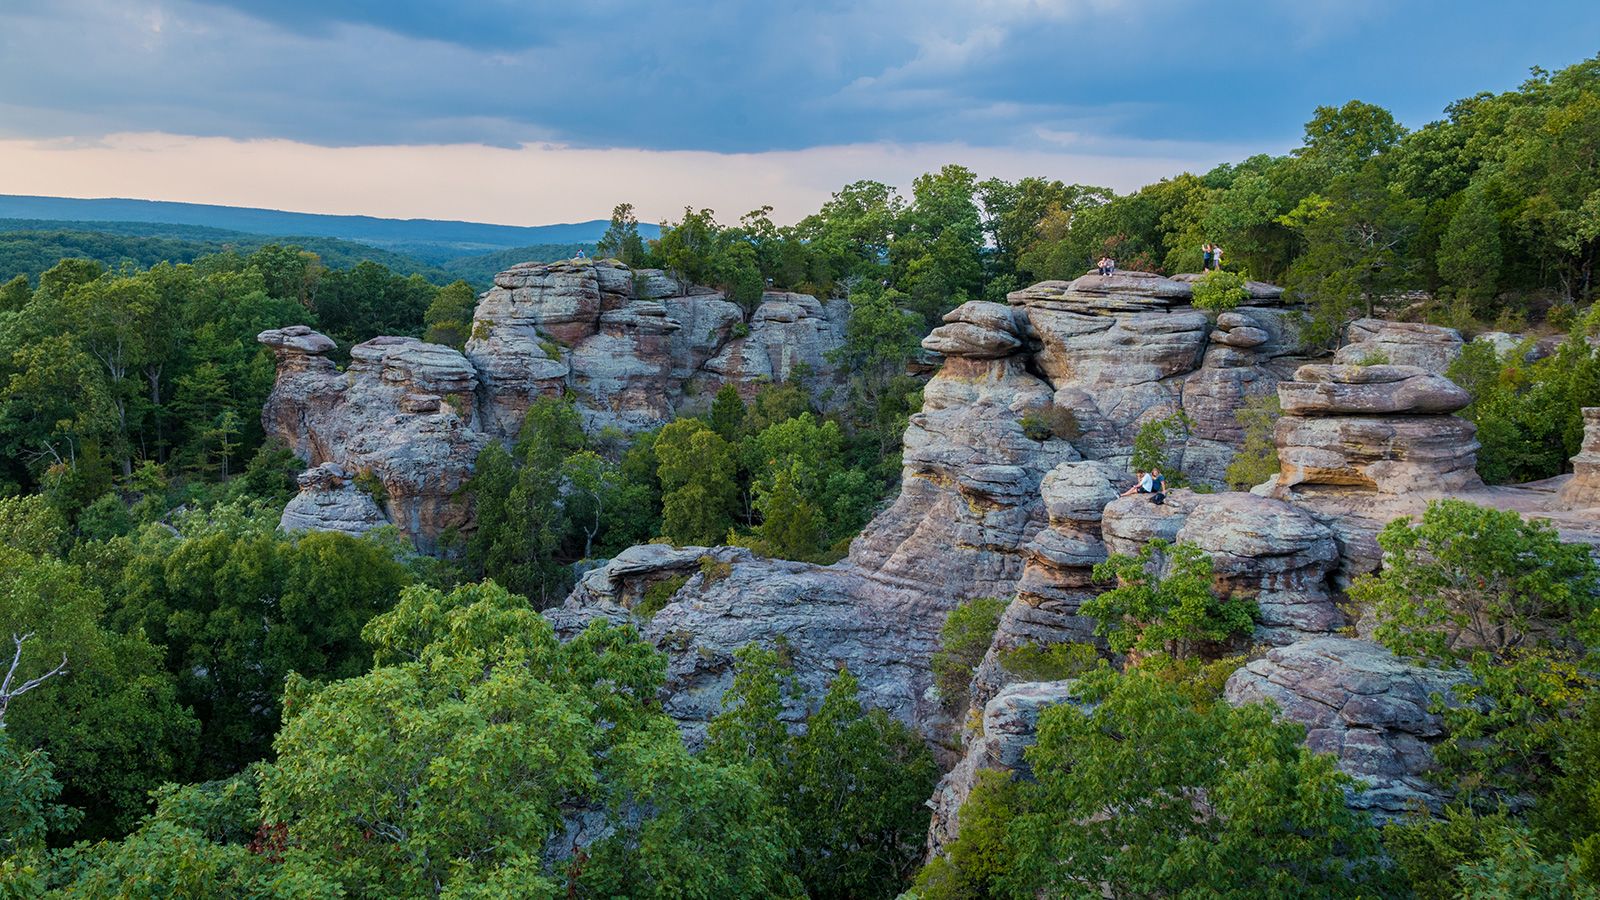 <strong>Southern Illinois:</strong> The Garden of Gods in Shawnee National Forest shows what visitors will find in this overlooked part of Illinois.